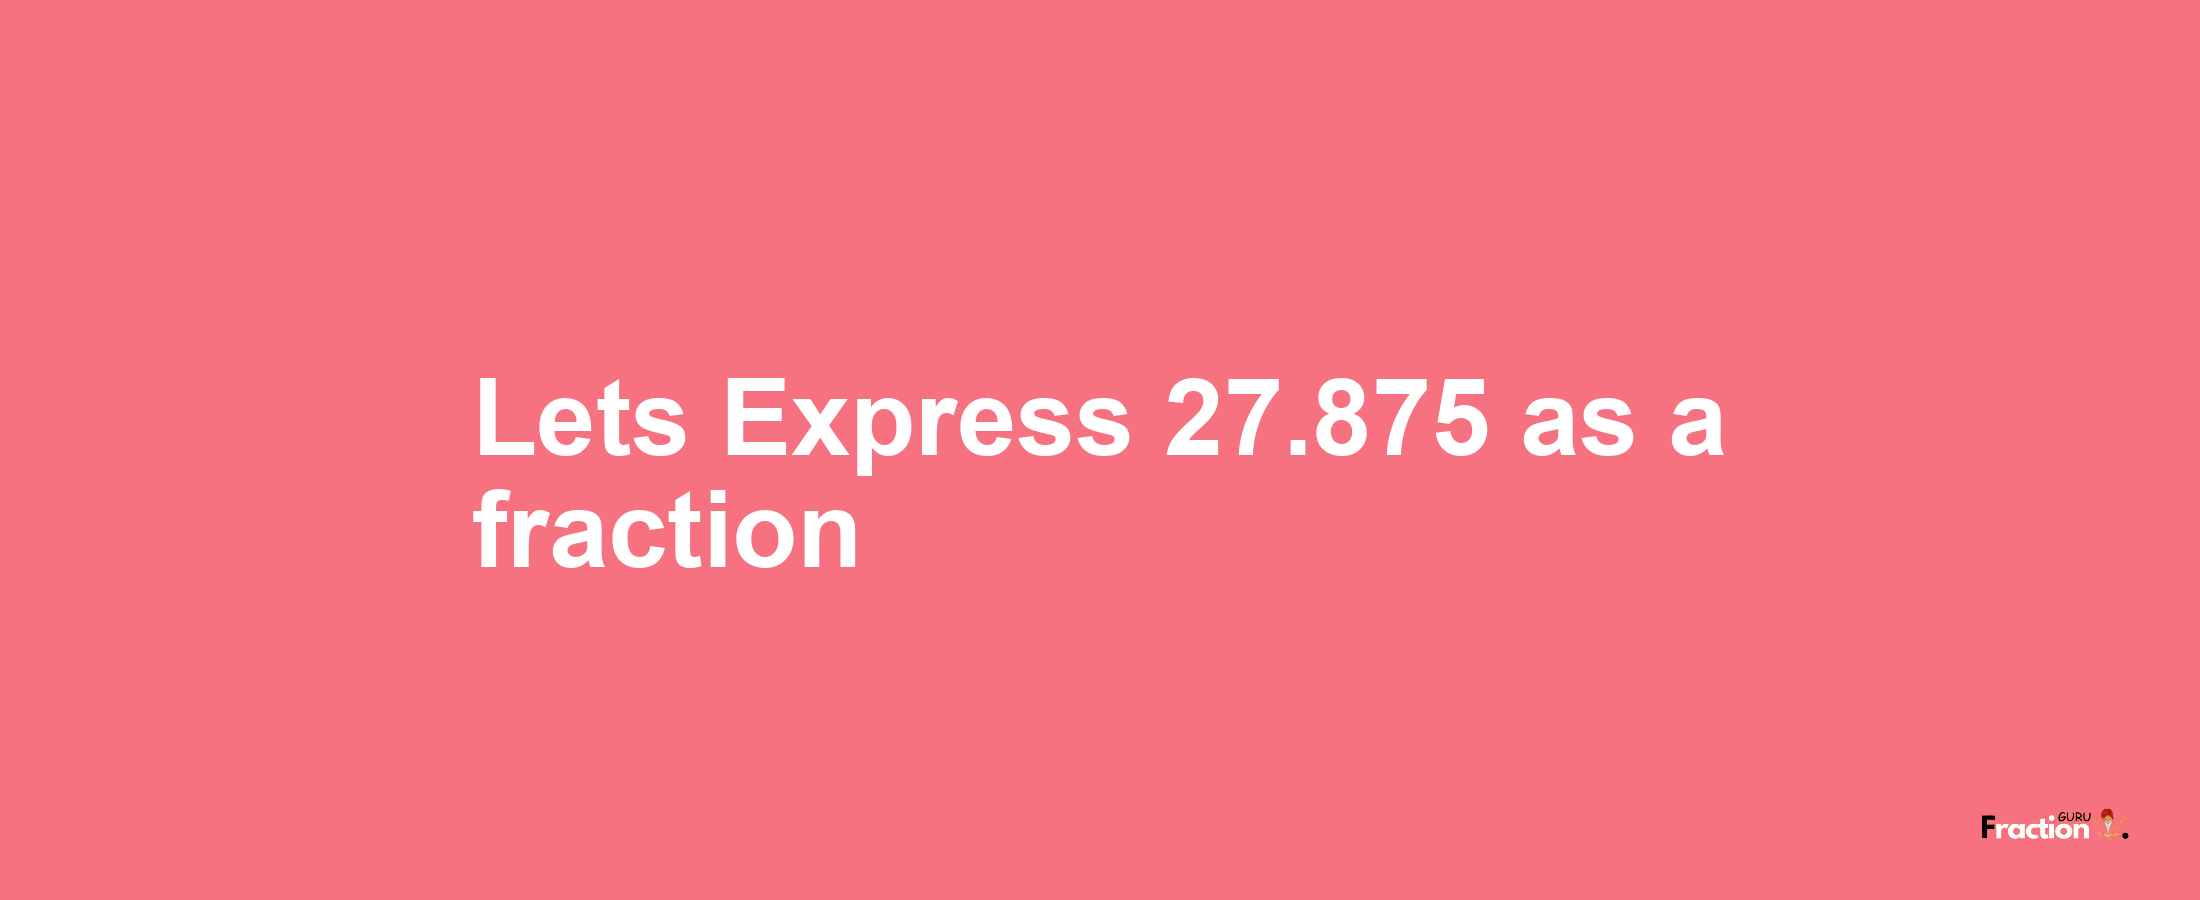 Lets Express 27.875 as afraction